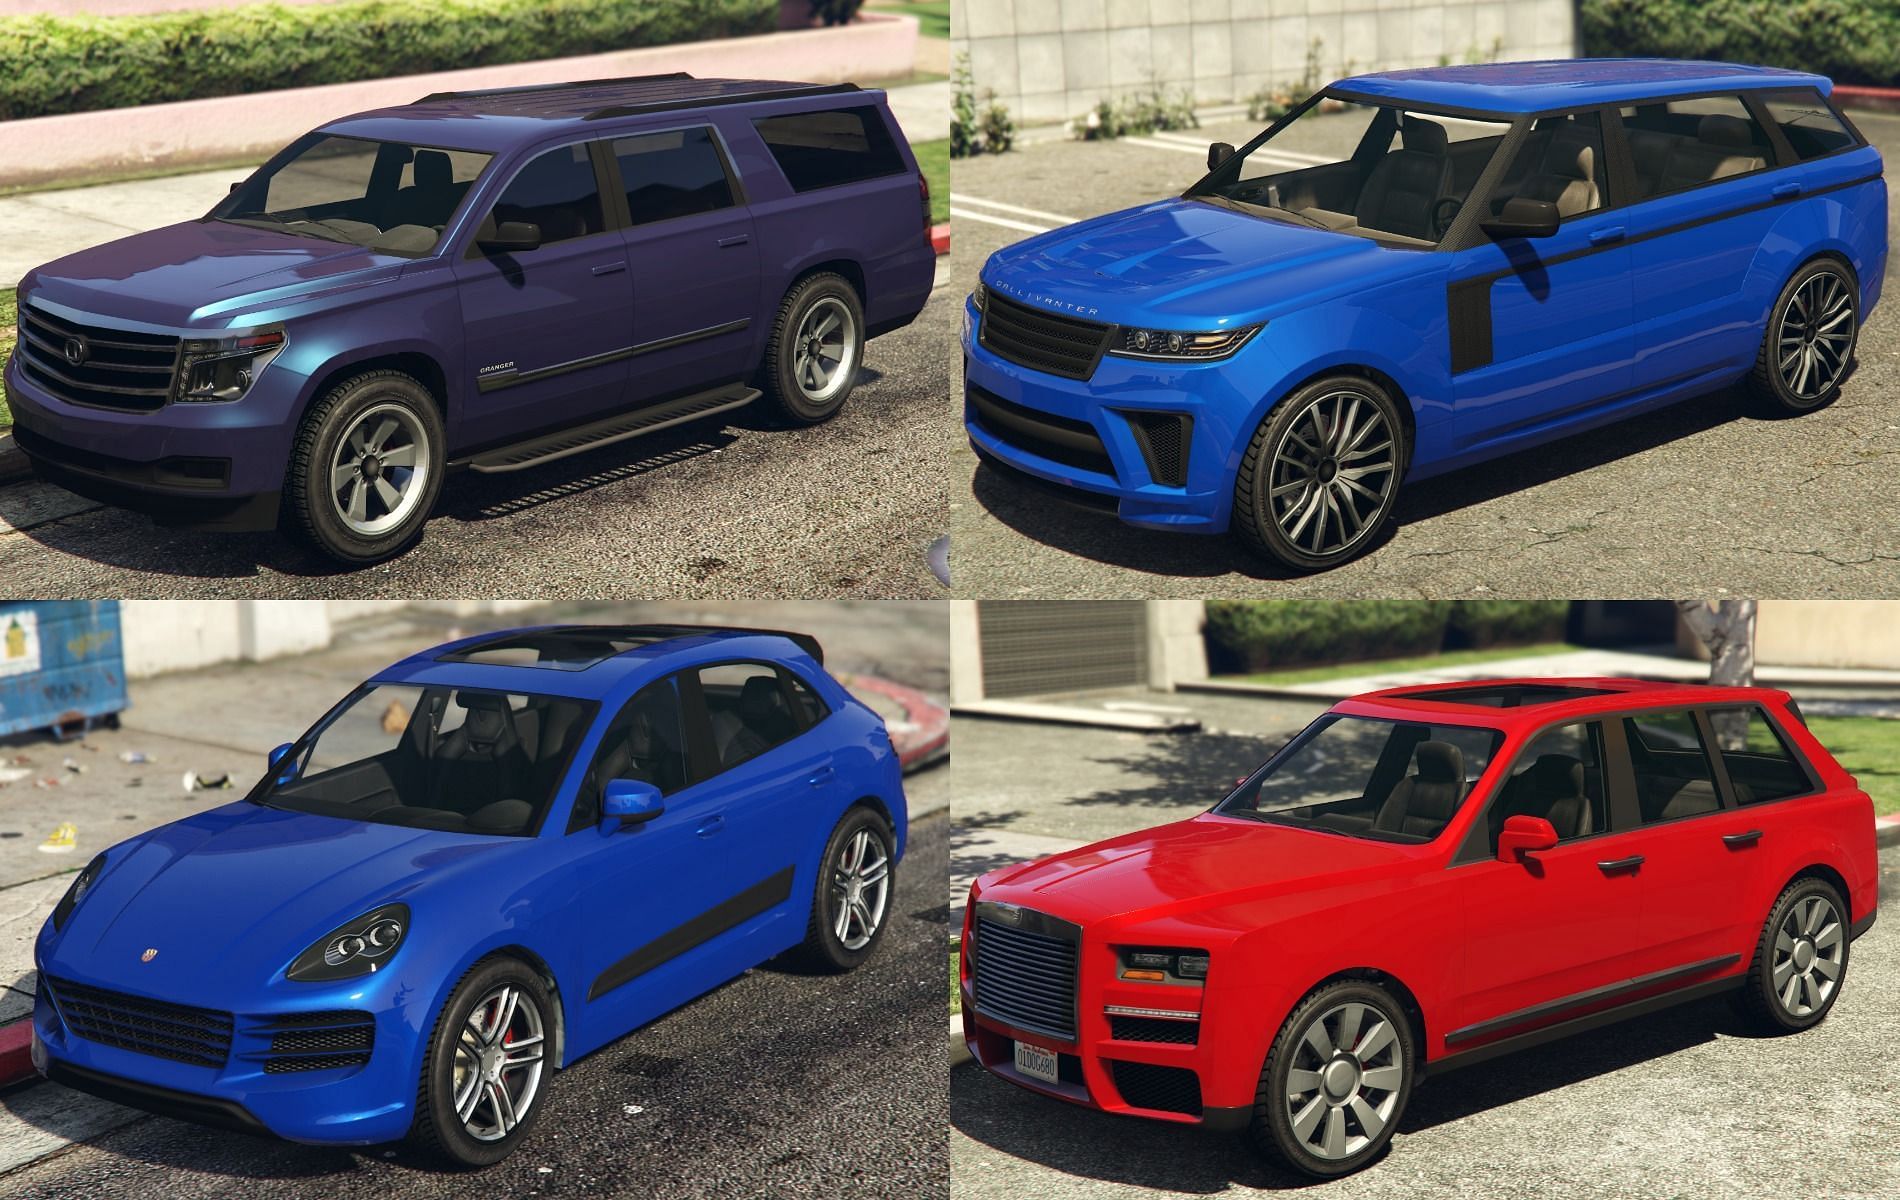 Some of the cheapest cars from The Contract (Images via Rockstar Games)